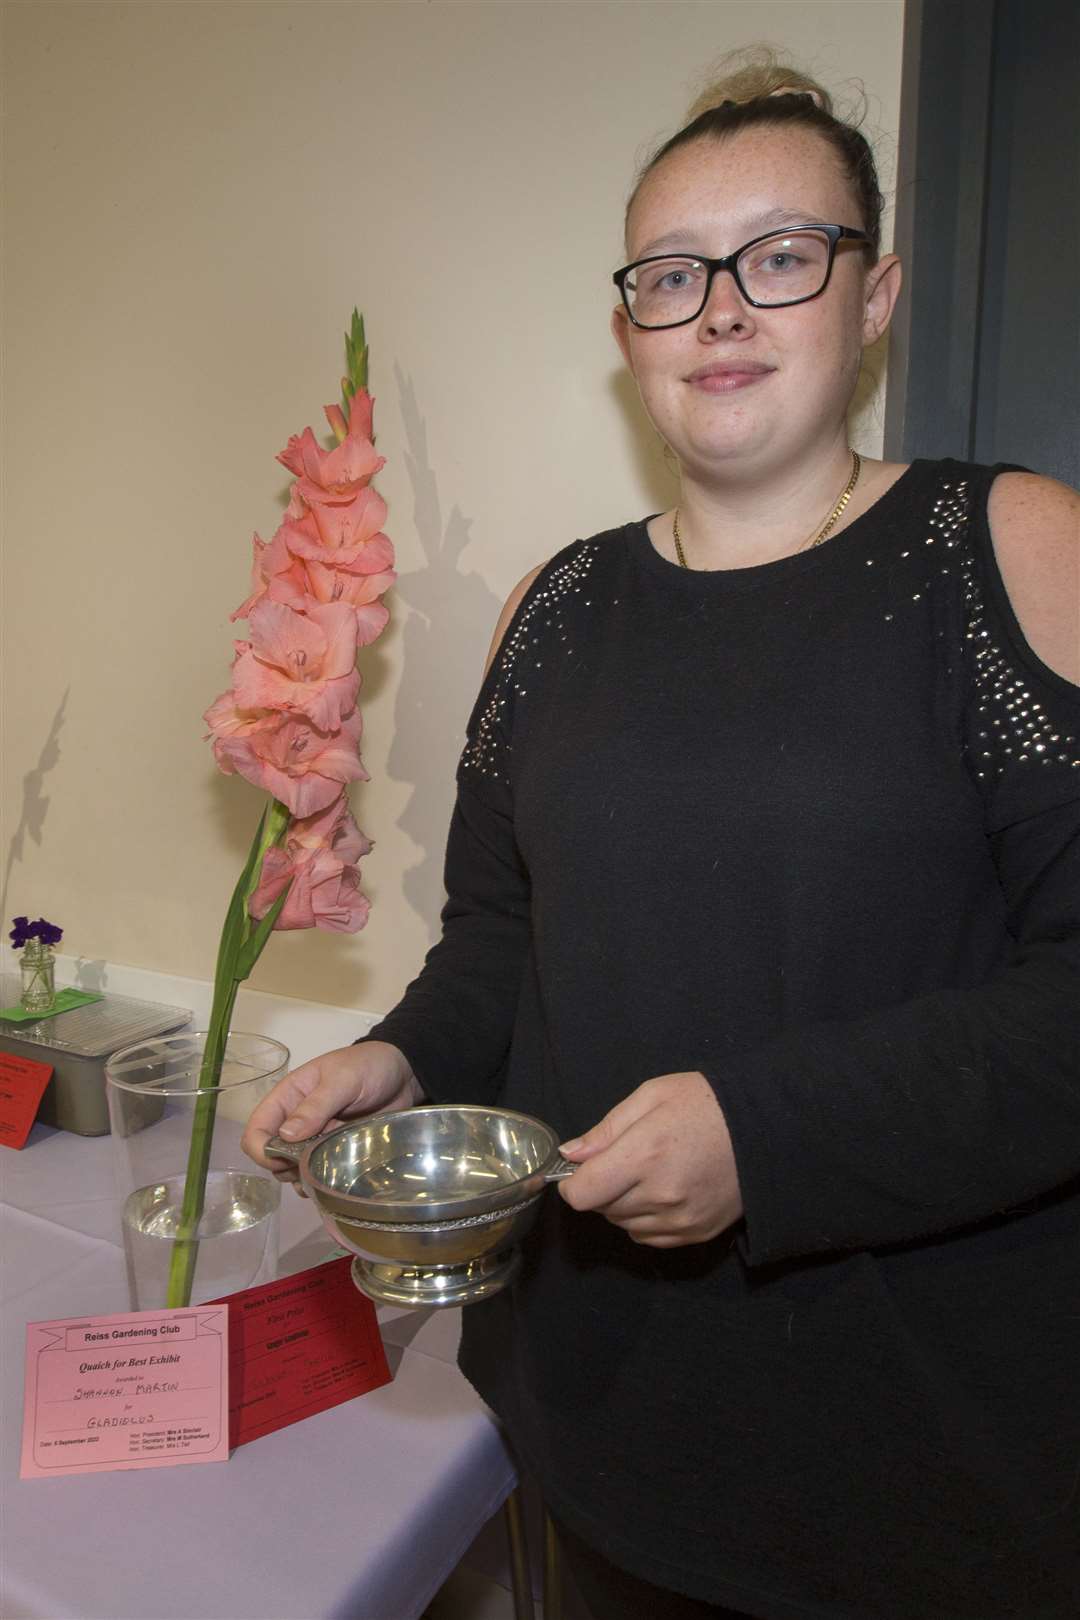 Shannon Martin with her gladioli that won the best exhibit at the Reiss Gardening Club's annual open flower and vegetable show. Picture: Robert MacDonald/Northern Studios